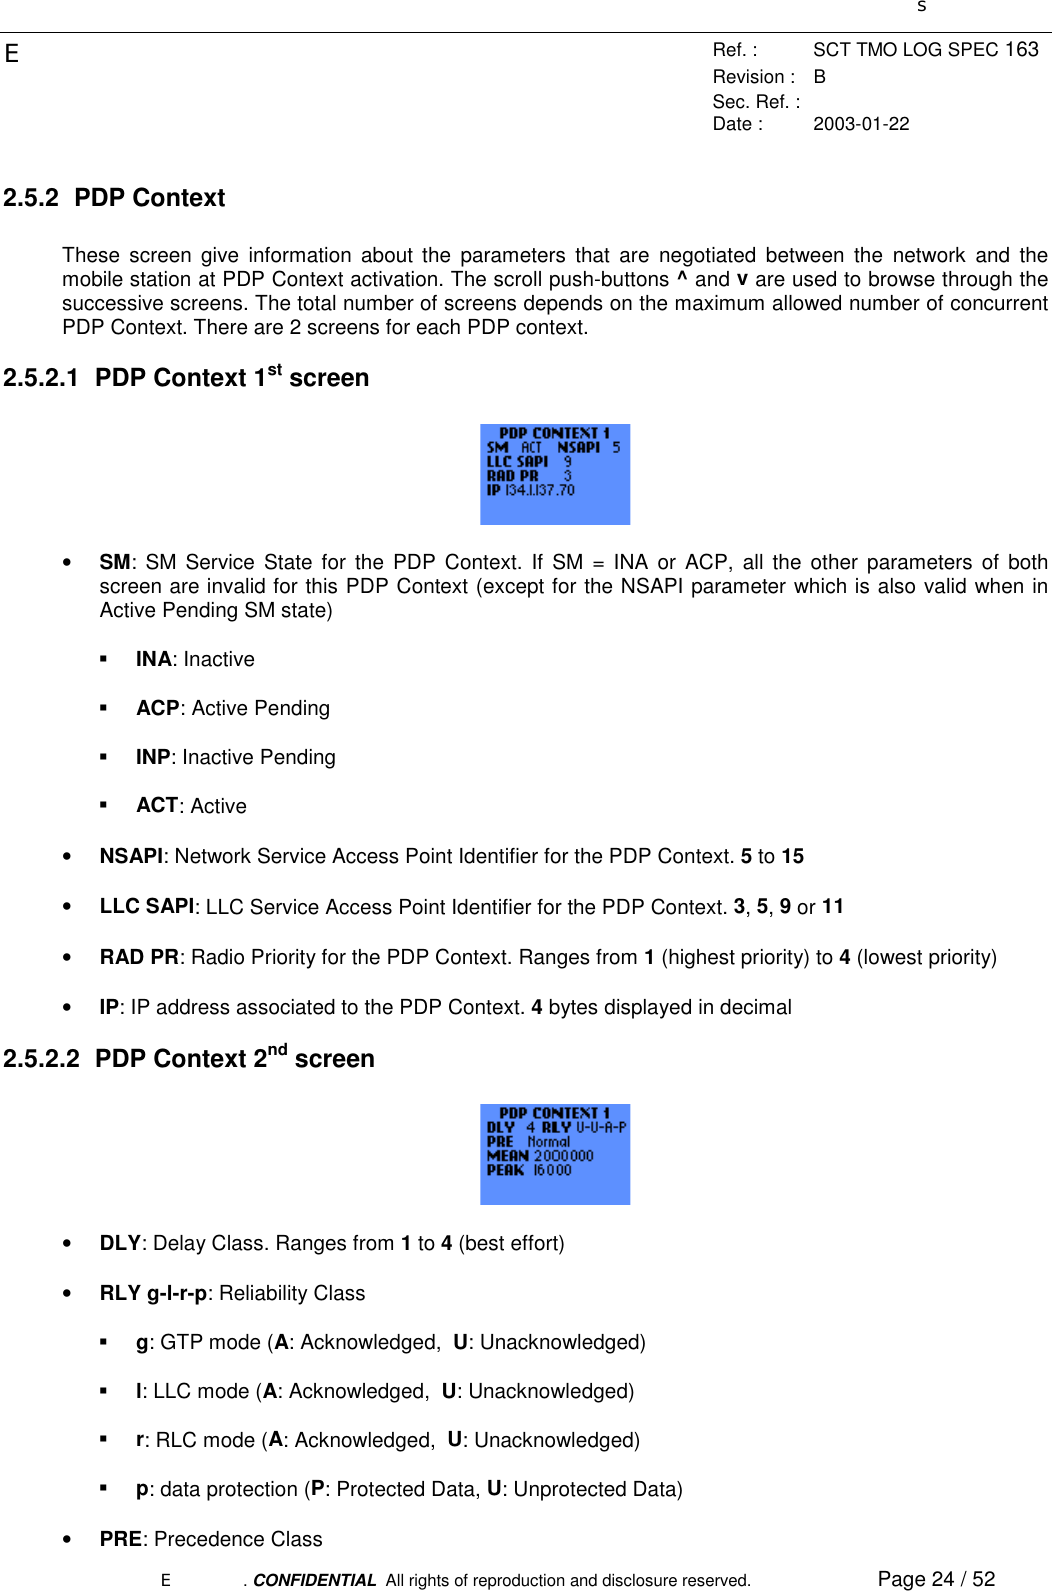 sERef. : SCT TMO LOG SPEC 163Revision : BSec. Ref. :Date : 2003-01-22E. CONFIDENTIAL  All rights of reproduction and disclosure reserved. Page 24 / 522.5.2 PDP ContextThese screen give information about the parameters that are negotiated between the network and themobile station at PDP Context activation. The scroll push-buttons ^ and v are used to browse through thesuccessive screens. The total number of screens depends on the maximum allowed number of concurrentPDP Context. There are 2 screens for each PDP context.2.5.2.1  PDP Context 1st screen• SM: SM Service State for the PDP Context. If SM = INA or ACP, all the other parameters of bothscreen are invalid for this PDP Context (except for the NSAPI parameter which is also valid when inActive Pending SM state)! INA: Inactive! ACP: Active Pending! INP: Inactive Pending! ACT: Active• NSAPI: Network Service Access Point Identifier for the PDP Context. 5 to 15• LLC SAPI: LLC Service Access Point Identifier for the PDP Context. 3, 5, 9 or 11• RAD PR: Radio Priority for the PDP Context. Ranges from 1 (highest priority) to 4 (lowest priority)• IP: IP address associated to the PDP Context. 4 bytes displayed in decimal2.5.2.2  PDP Context 2nd screen• DLY: Delay Class. Ranges from 1 to 4 (best effort)• RLY g-l-r-p: Reliability Class! g: GTP mode (A: Acknowledged,  U: Unacknowledged)! l: LLC mode (A: Acknowledged,  U: Unacknowledged)! r: RLC mode (A: Acknowledged,  U: Unacknowledged)! p: data protection (P: Protected Data, U: Unprotected Data)• PRE: Precedence Class